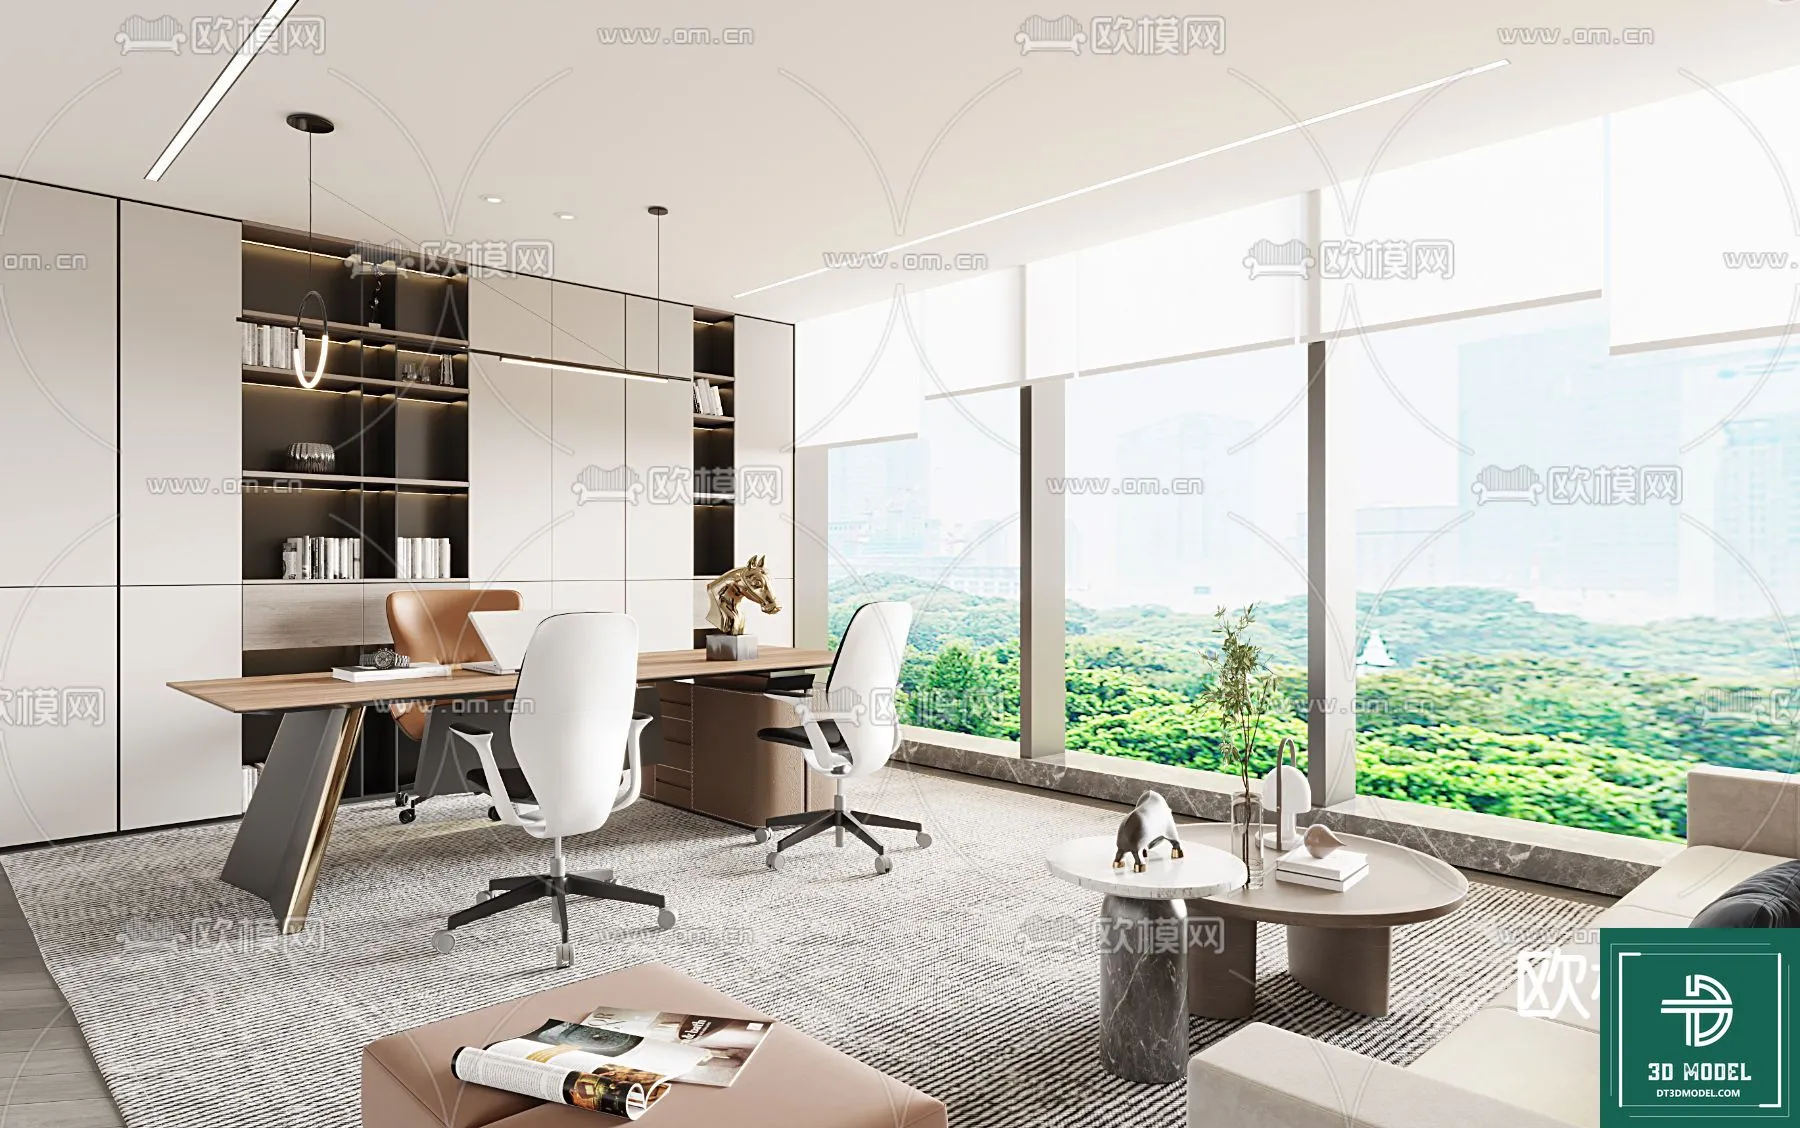 OFFICE ROOM FOR MANAGER – 3DMODEL – 056